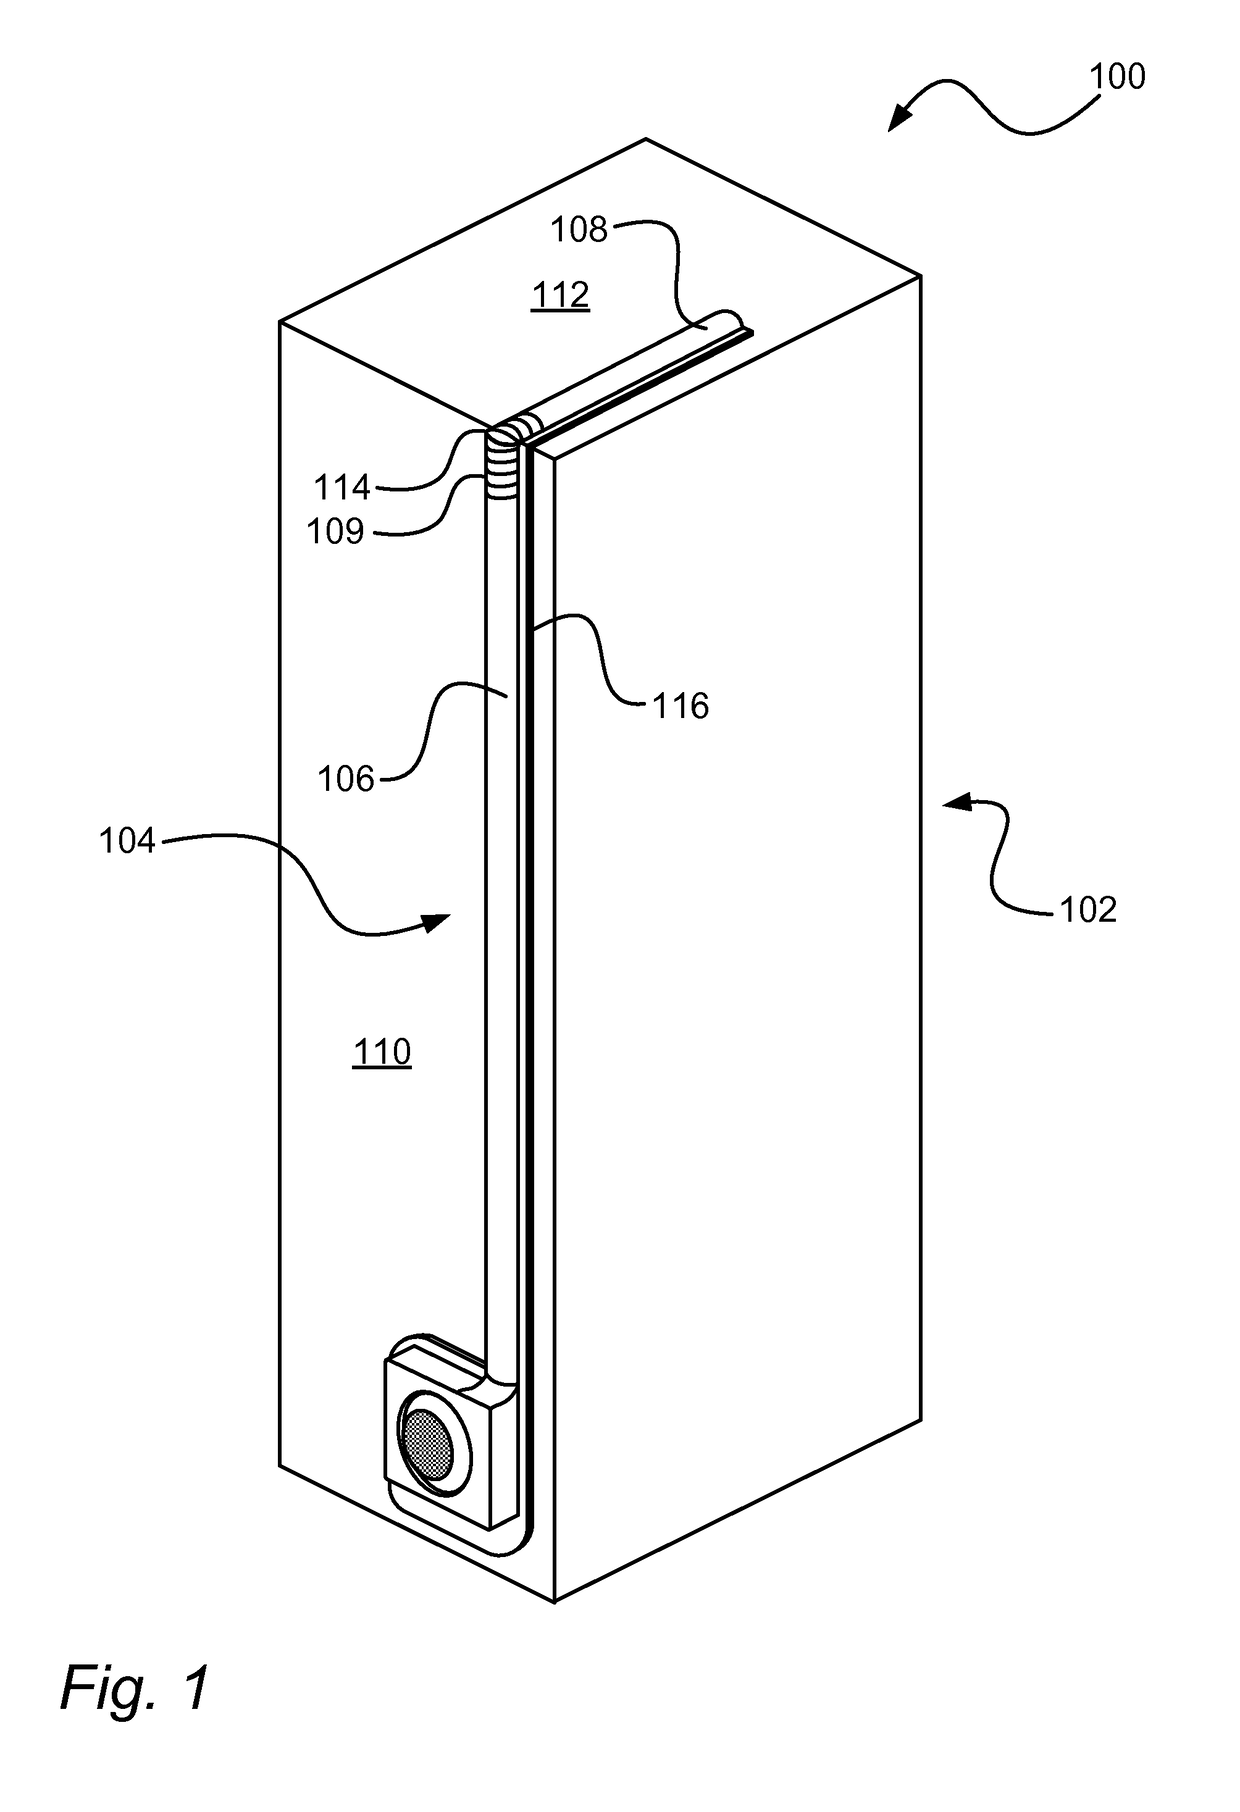 Hollow body to be attached to a package and a method for producing said hollow body